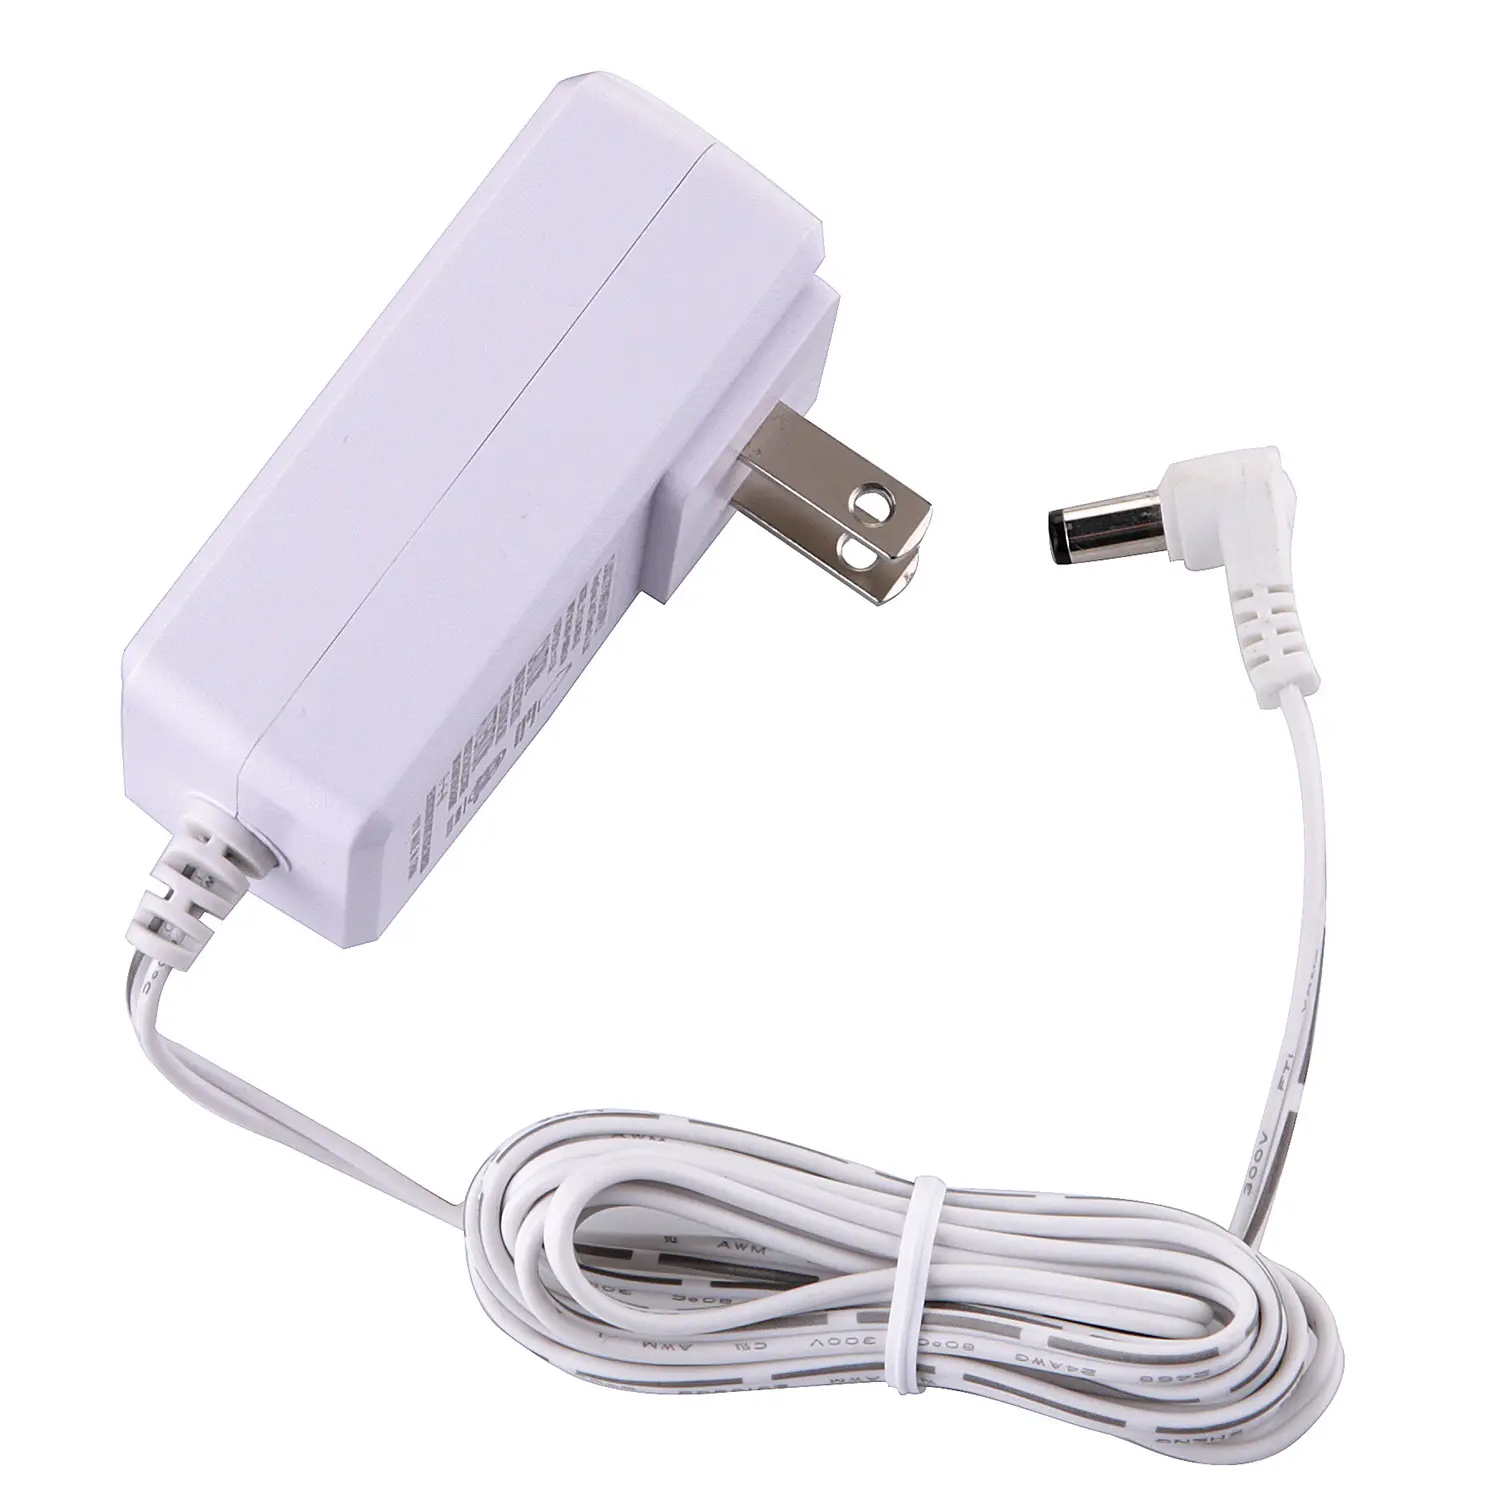 5v 9v 12v 24v 15v 0.5a 0.8a 1a 2a Power Adaptor With ETL FCC PSE Certificates Ac Dc Home Appliance Power Adapters